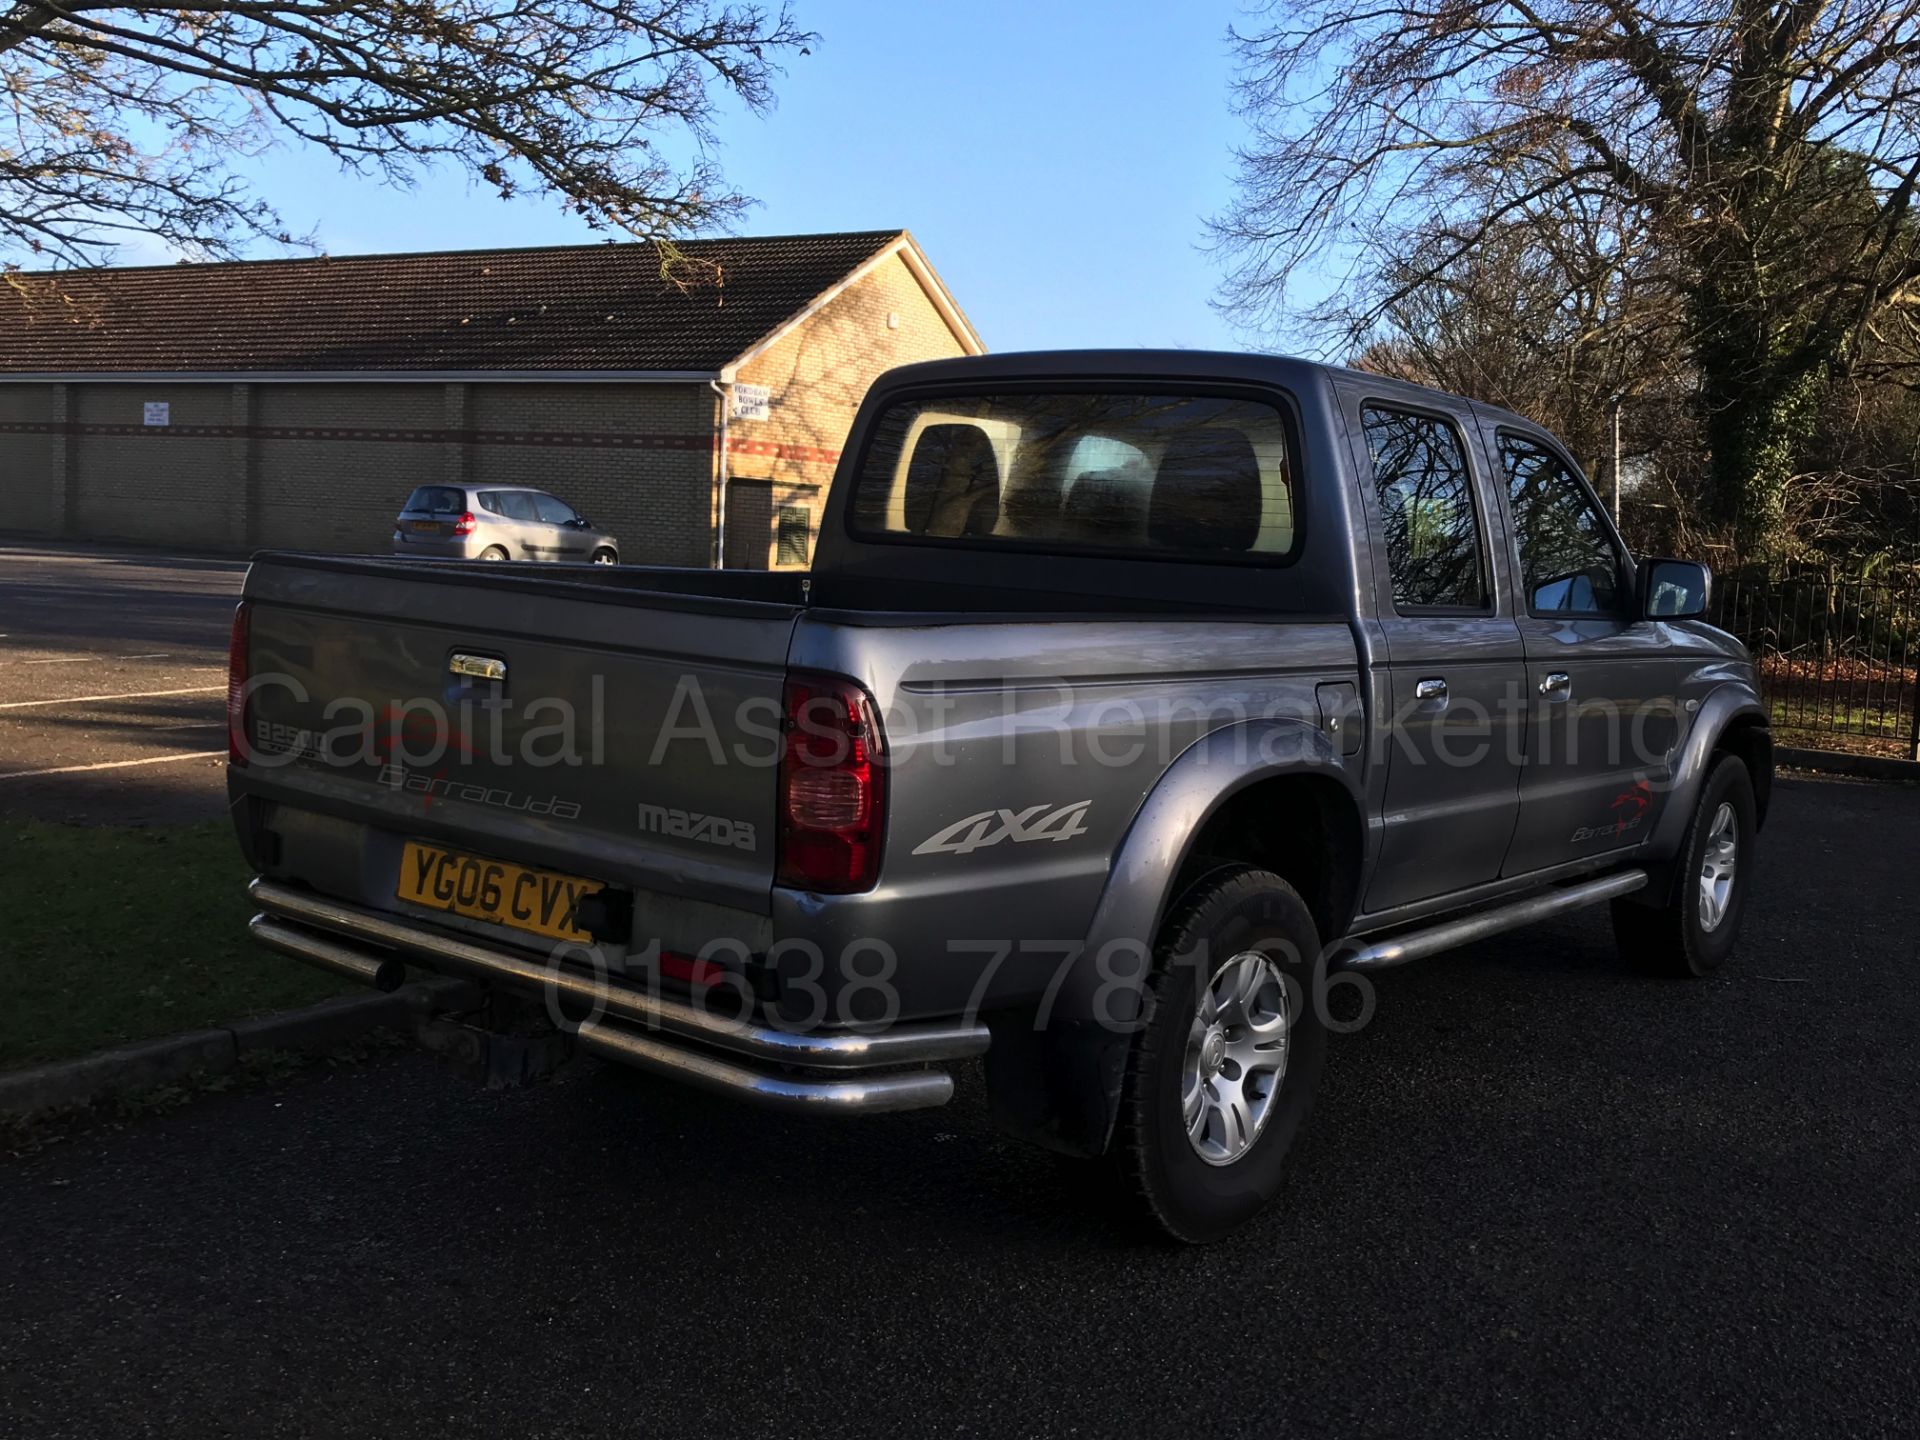 MAZDA B2500 '4-STYLE DOUBLE CAB PICK-UP' (2006 - 06 REG) '2.5 DIESEL - 109 BHP' *AIR CON* (NO VAT) - Image 9 of 30